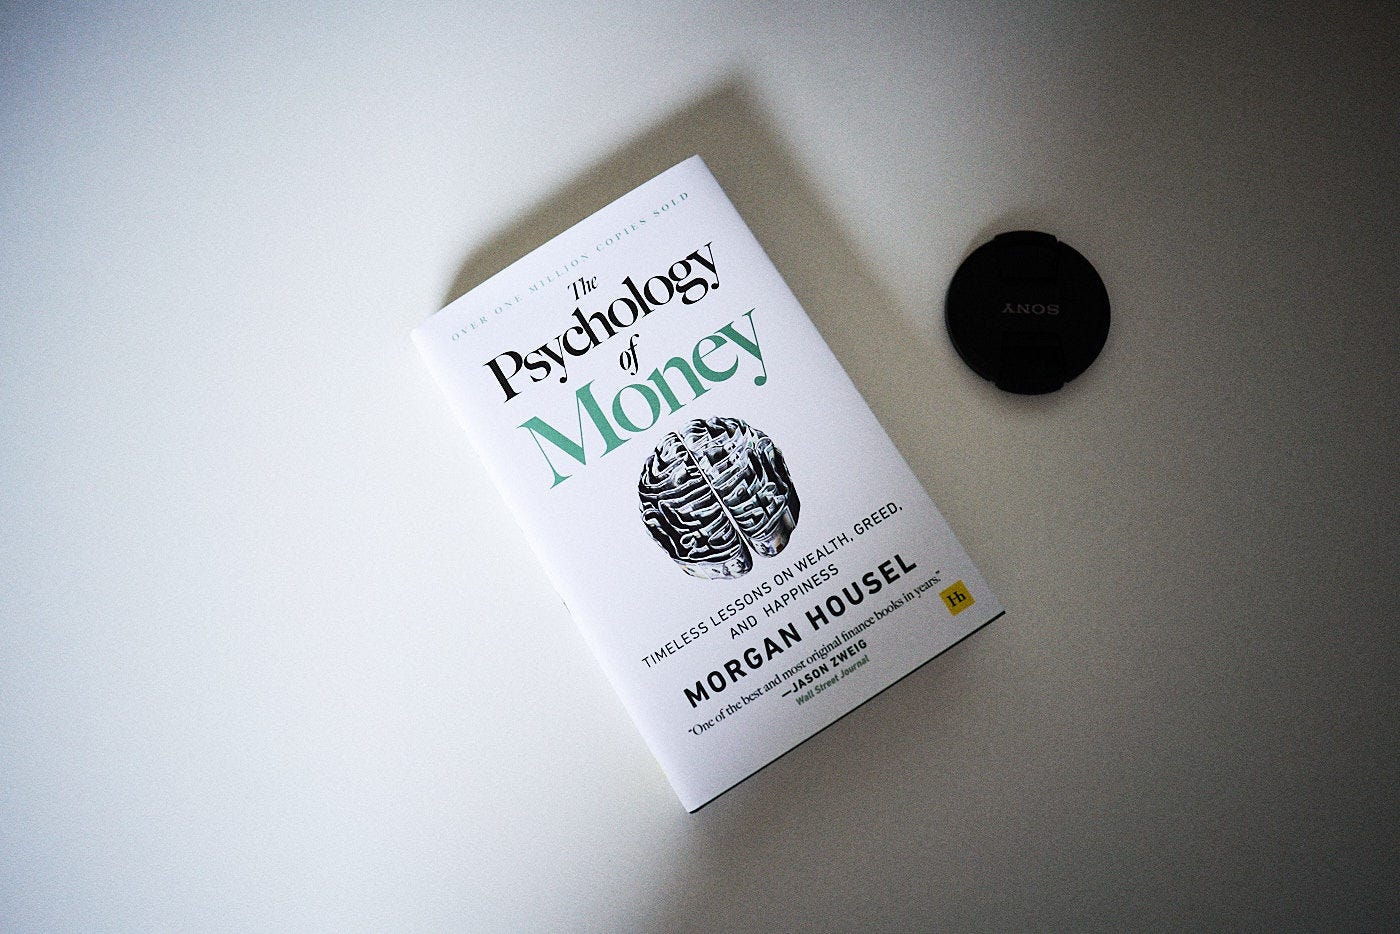 &ldquo;The Psychology of Money&rdquo; by Morgan Housel